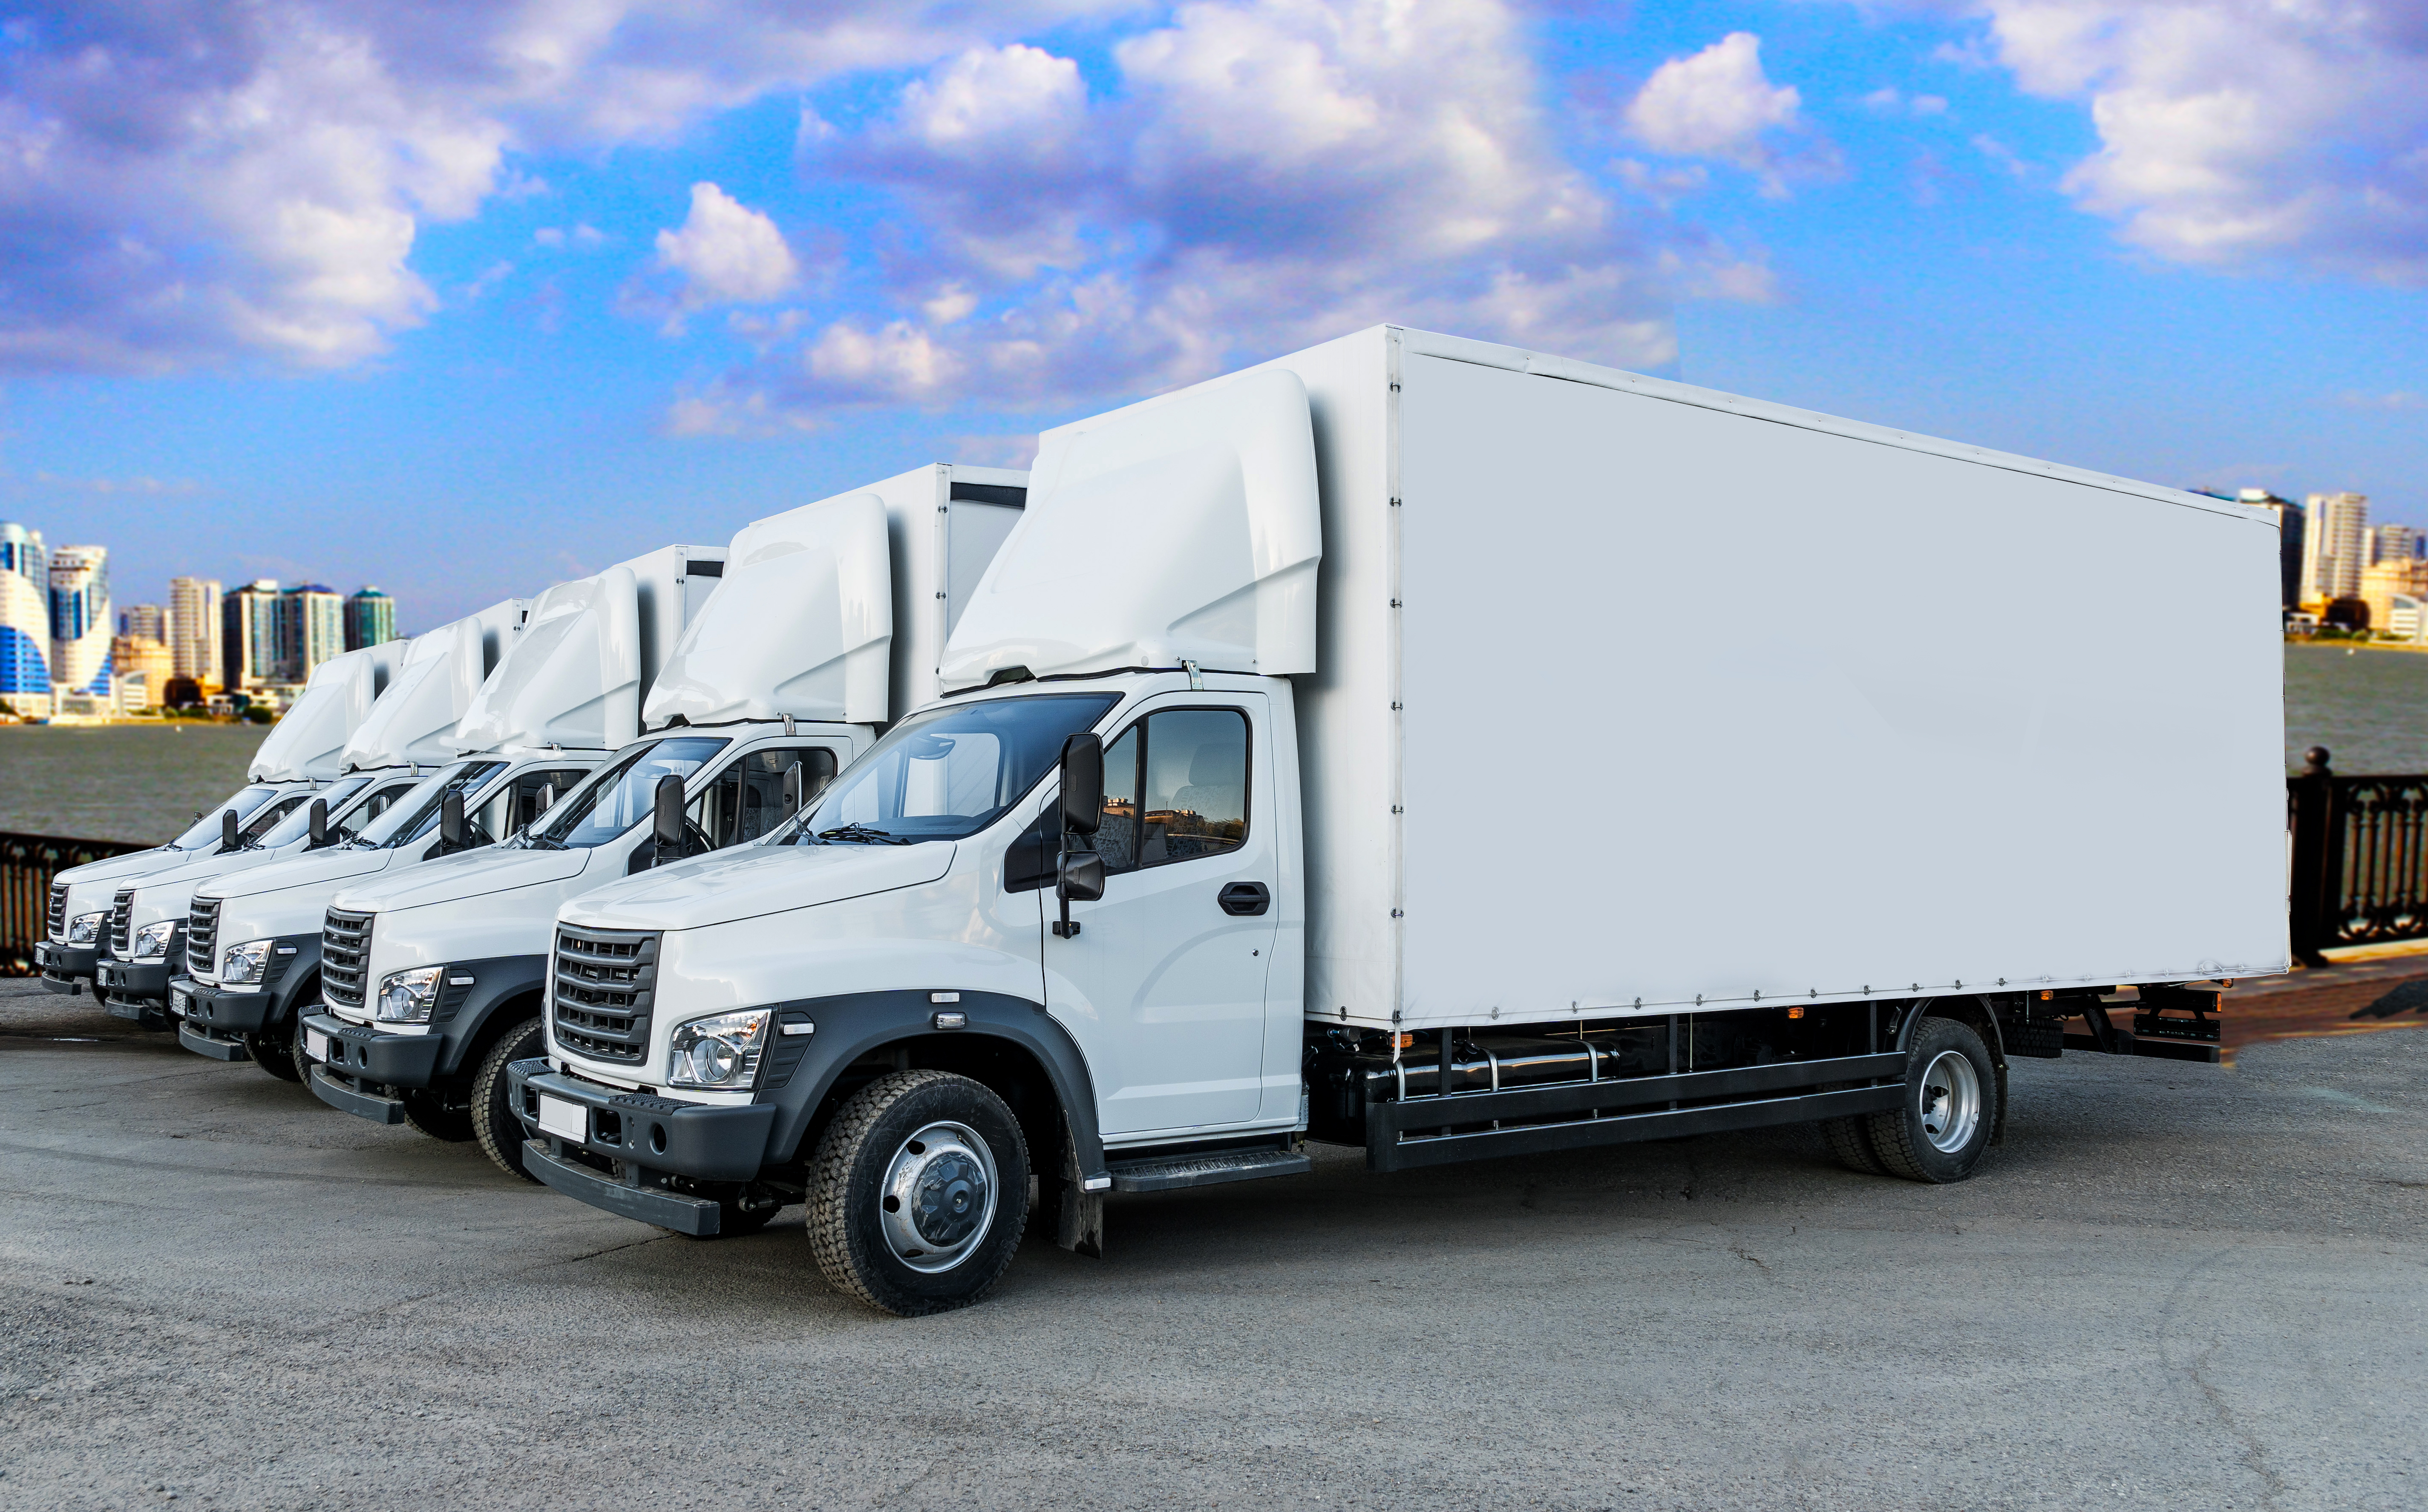 Five Box trucks that need insurance in a parking lot